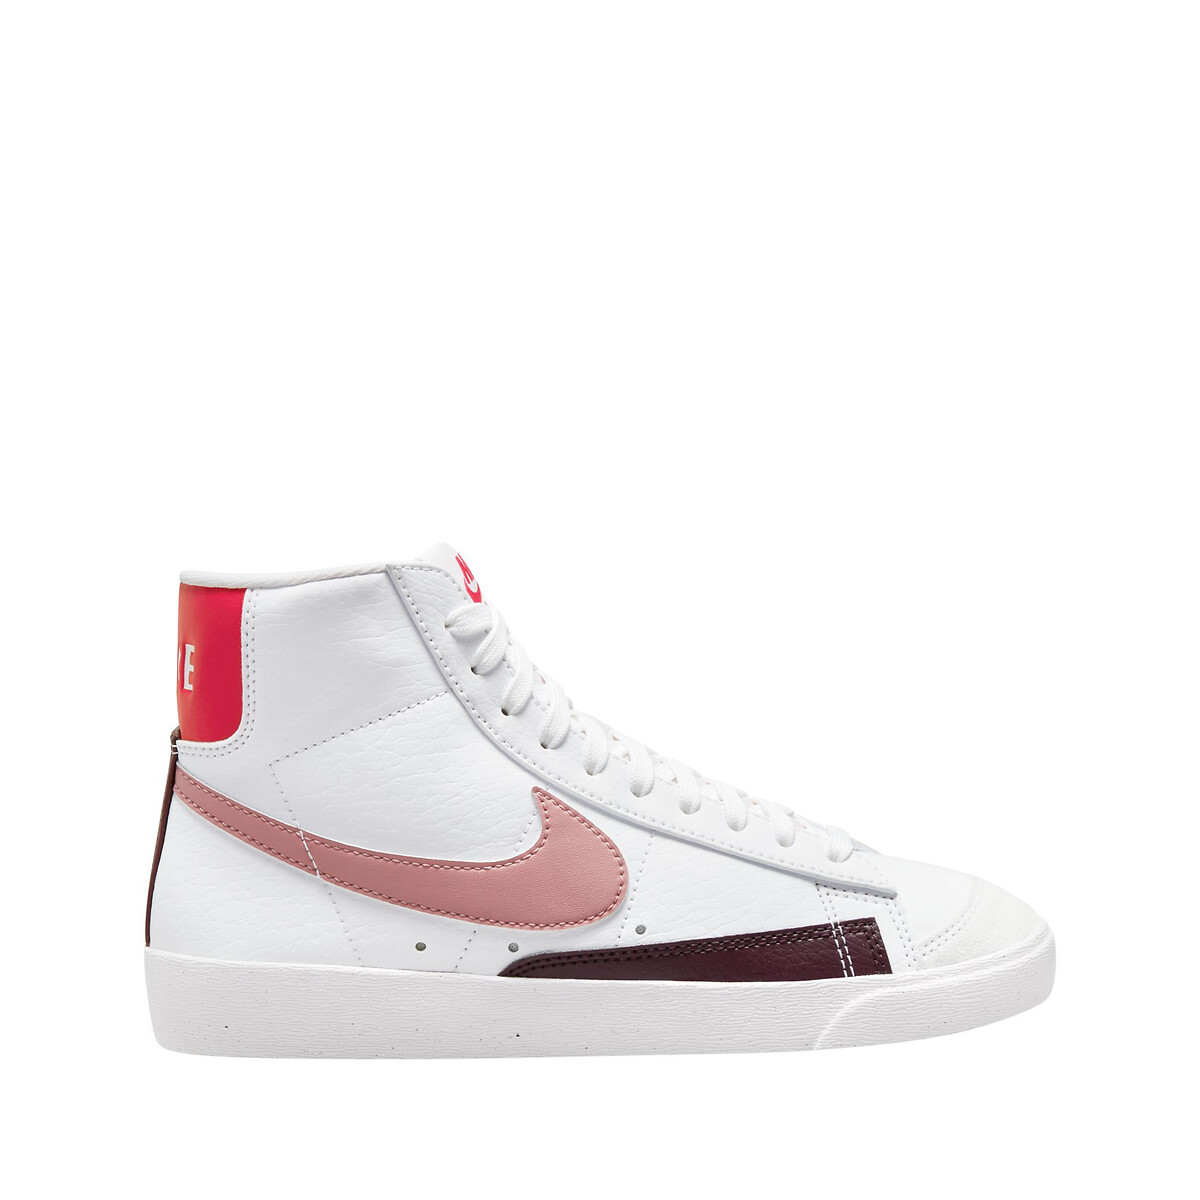 Image of Blazer Mid '77 Next Nature High Top Trainers